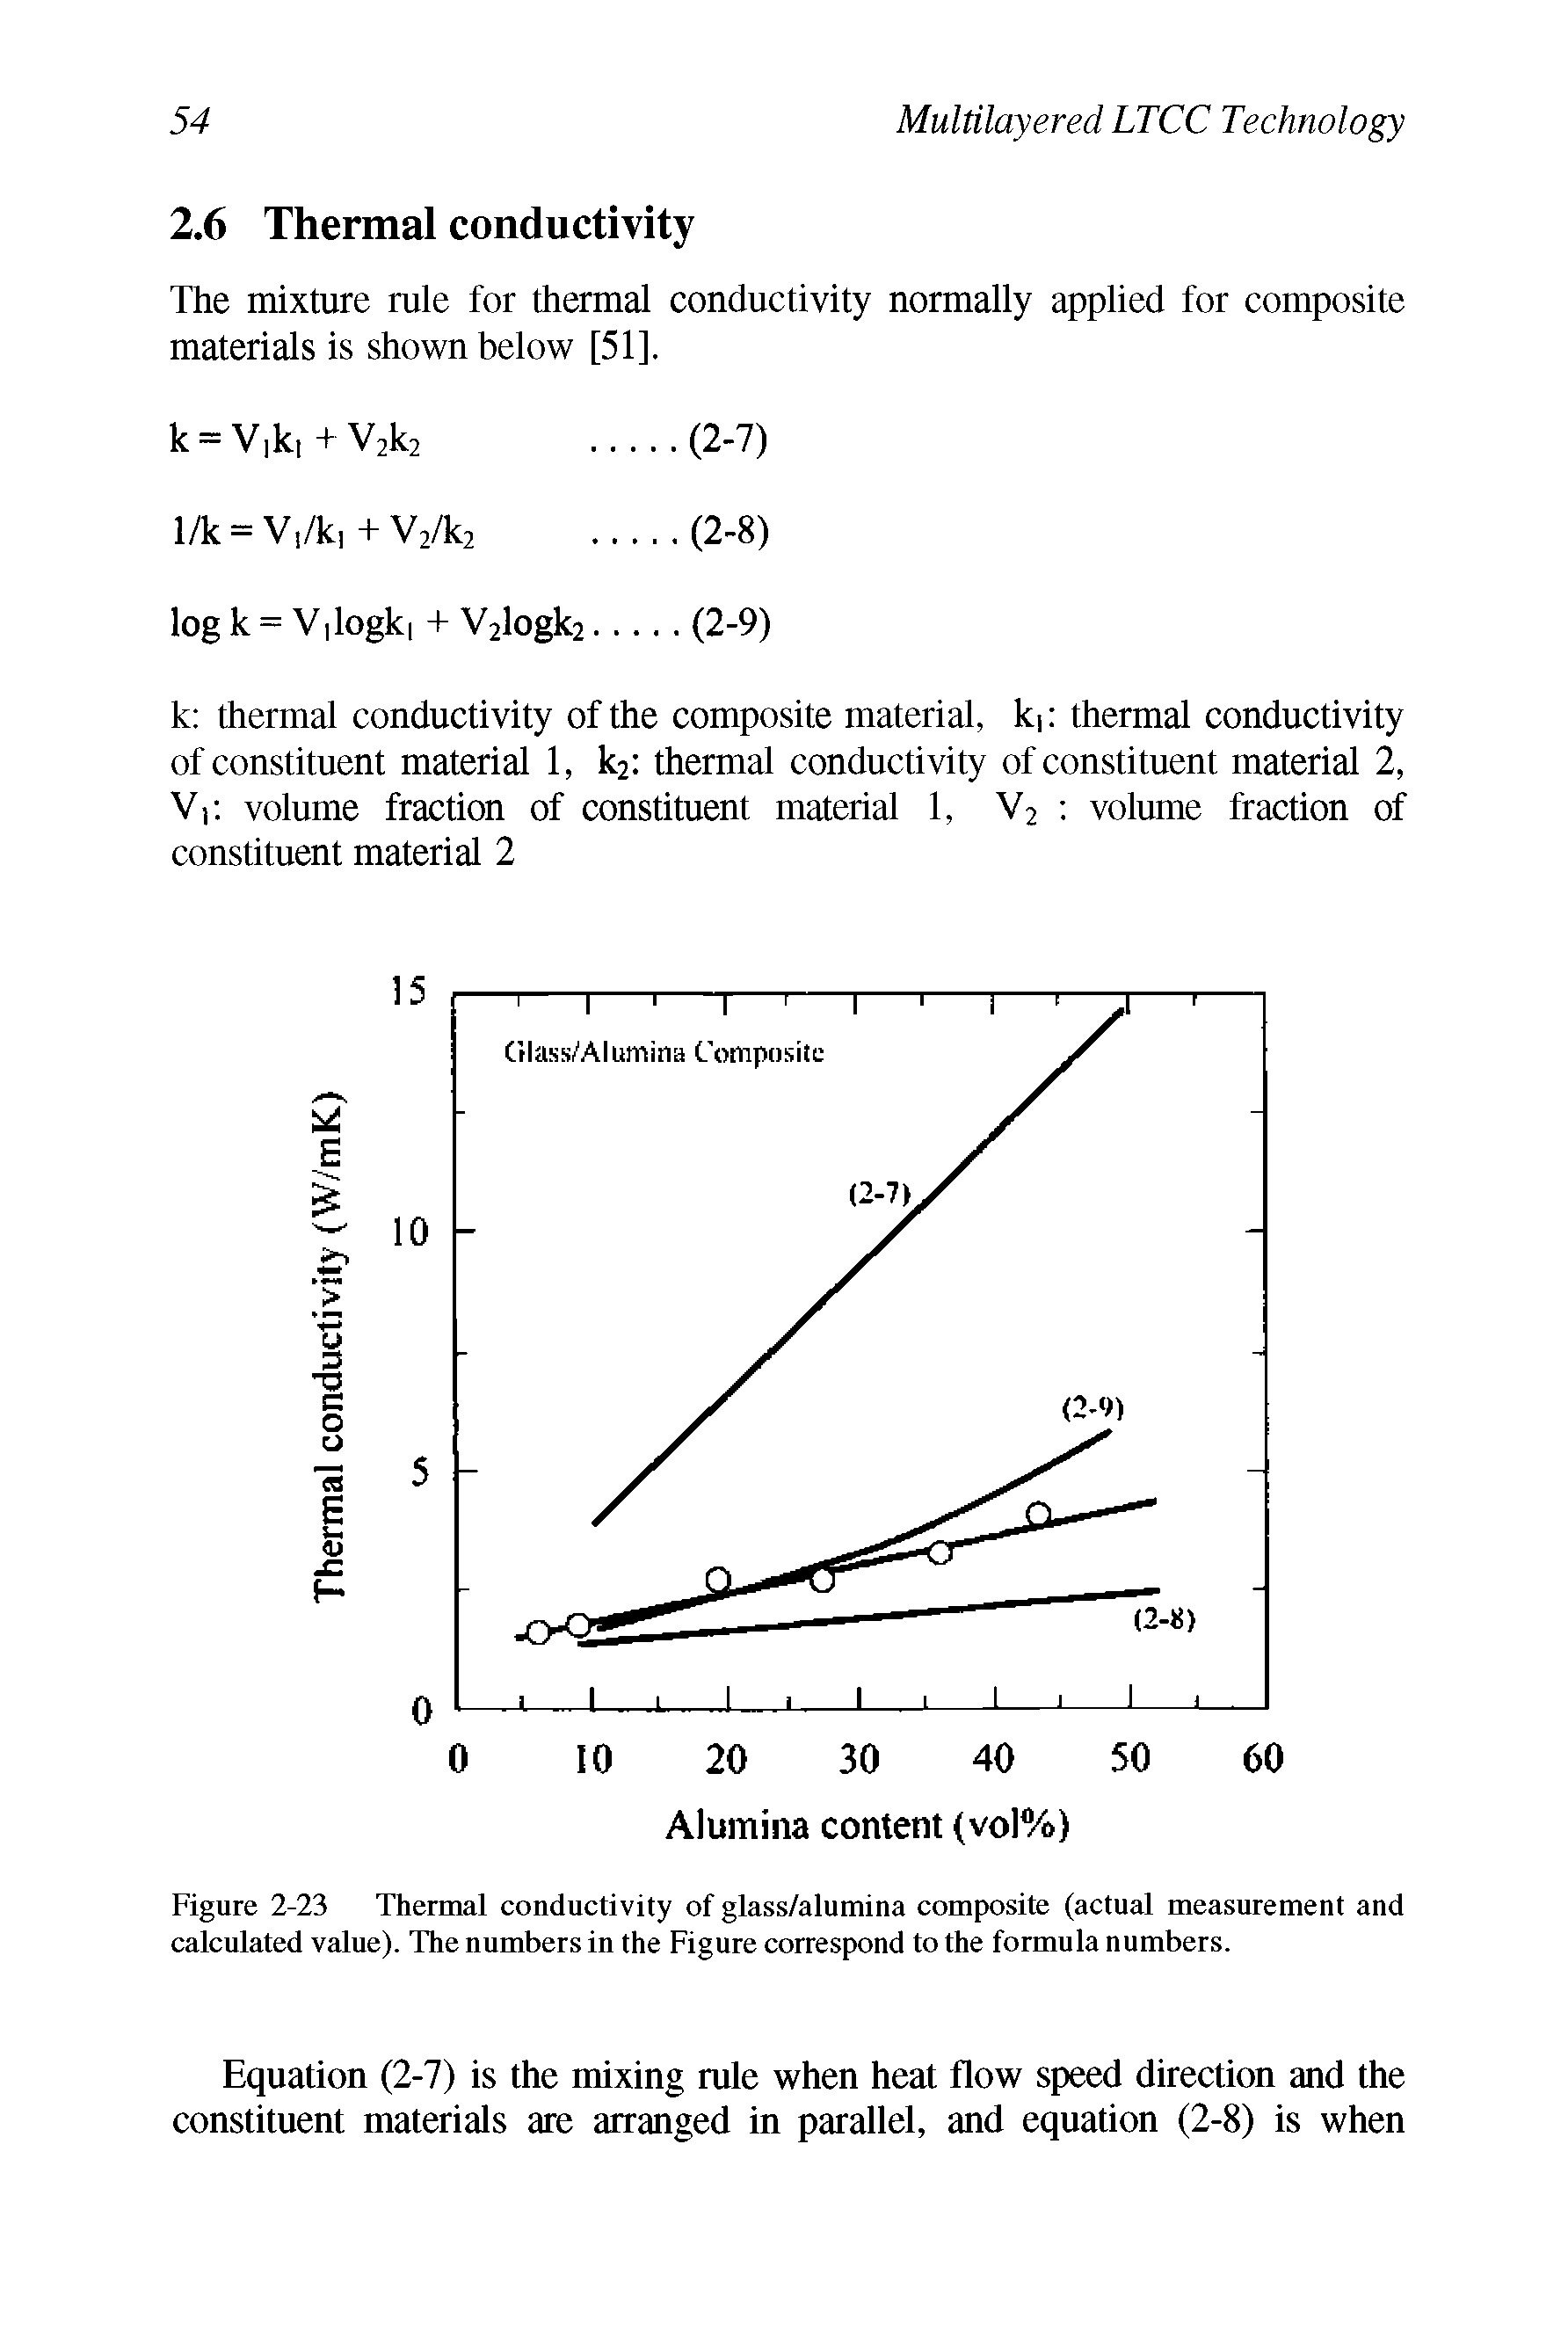 Figure 2-23 Thermal conductivity of glass/alumina composite (actual measurement and calculated value). The numbers in the Figure correspond to the formula numbers.